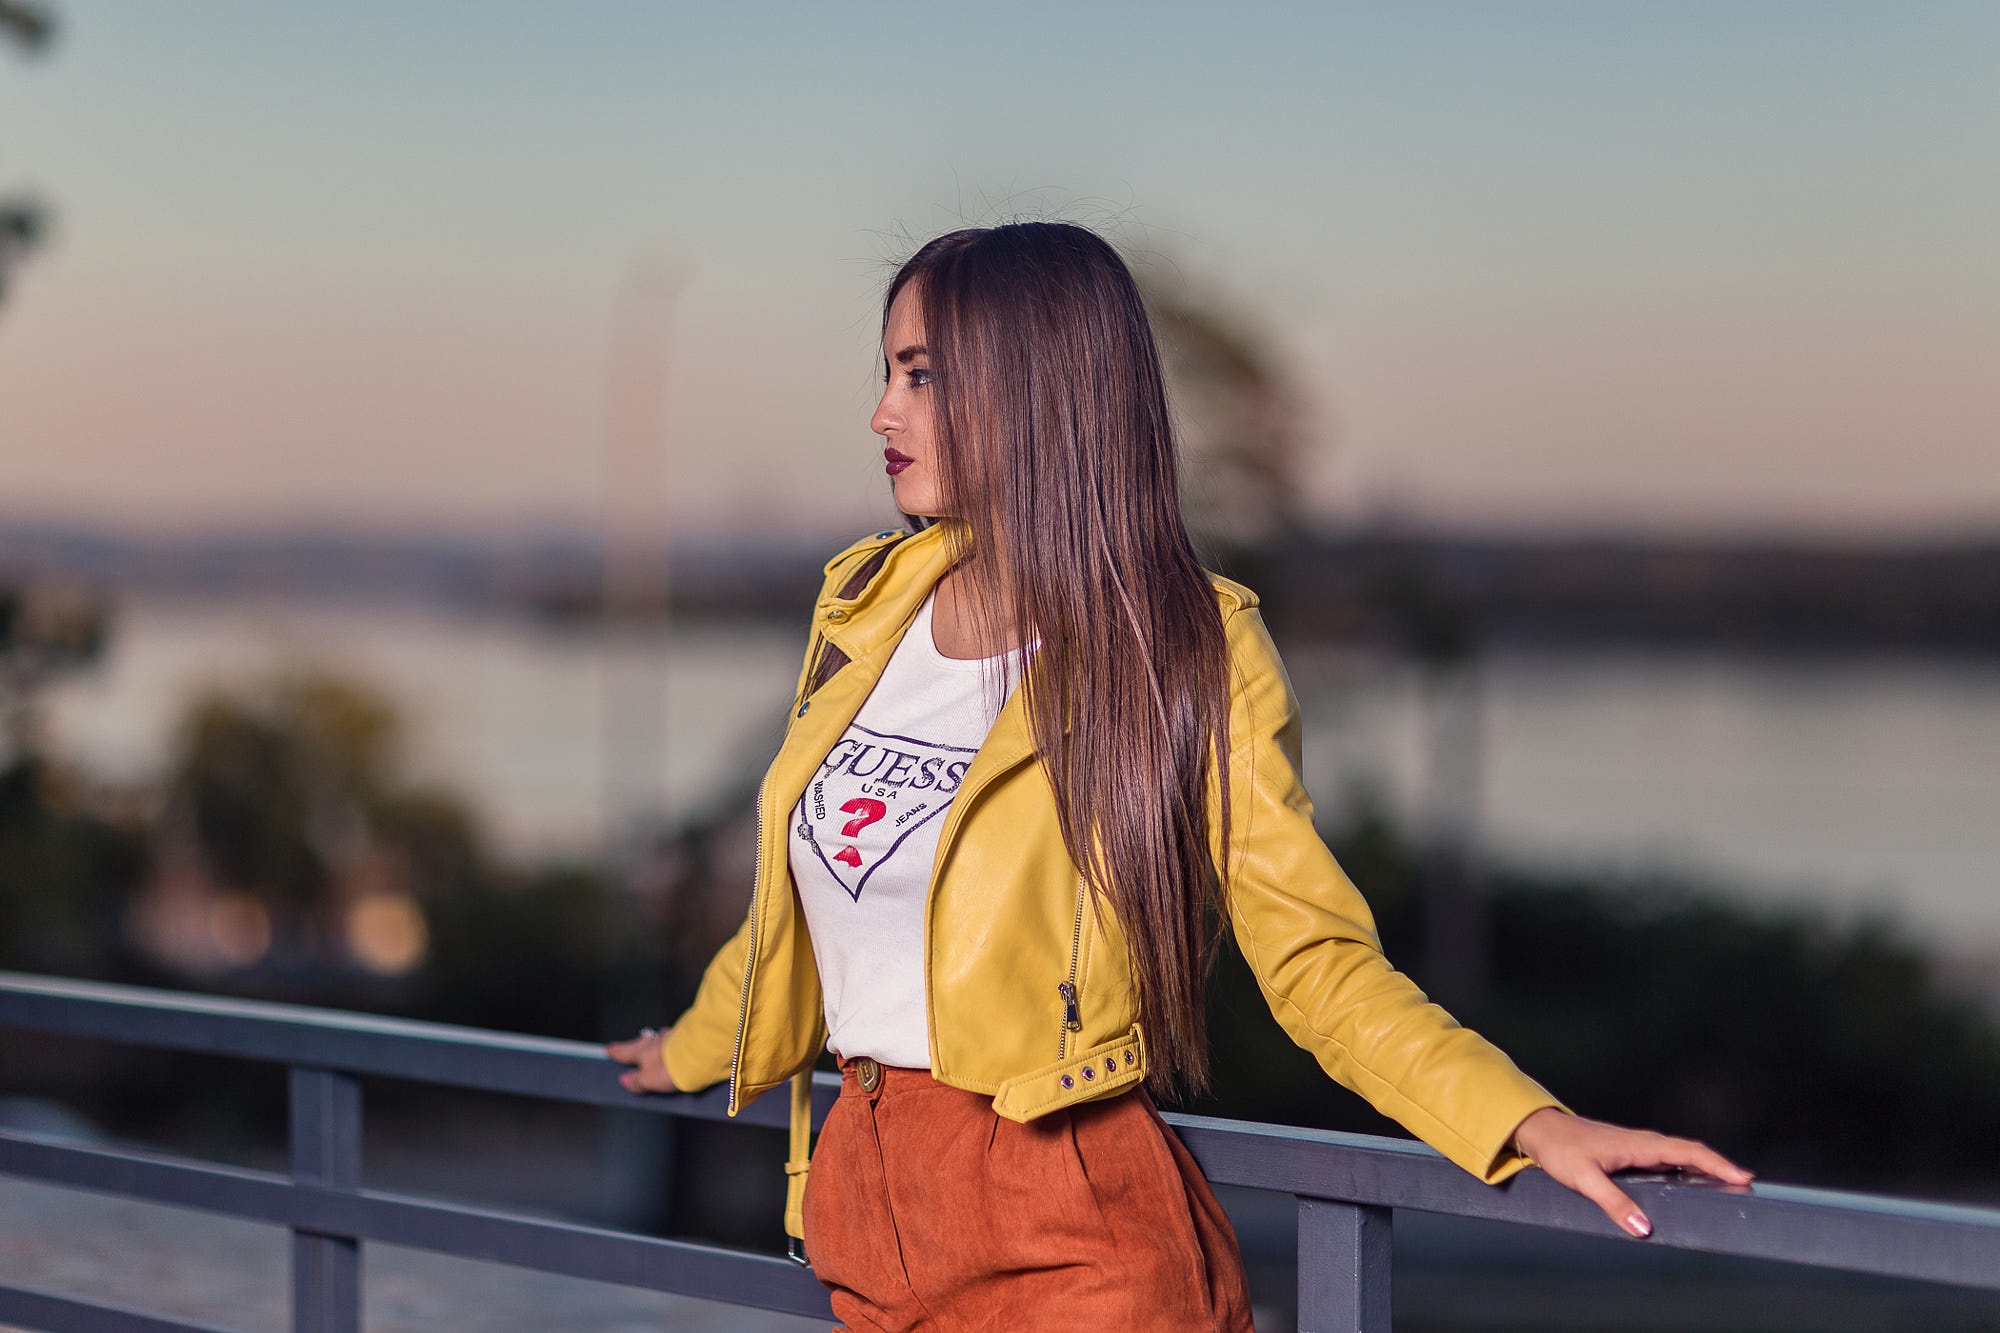 People 2000x1333 women long hair women outdoors profile yellow jacket balcony white t-shirt standing looking into the distance T-shirt brown pants